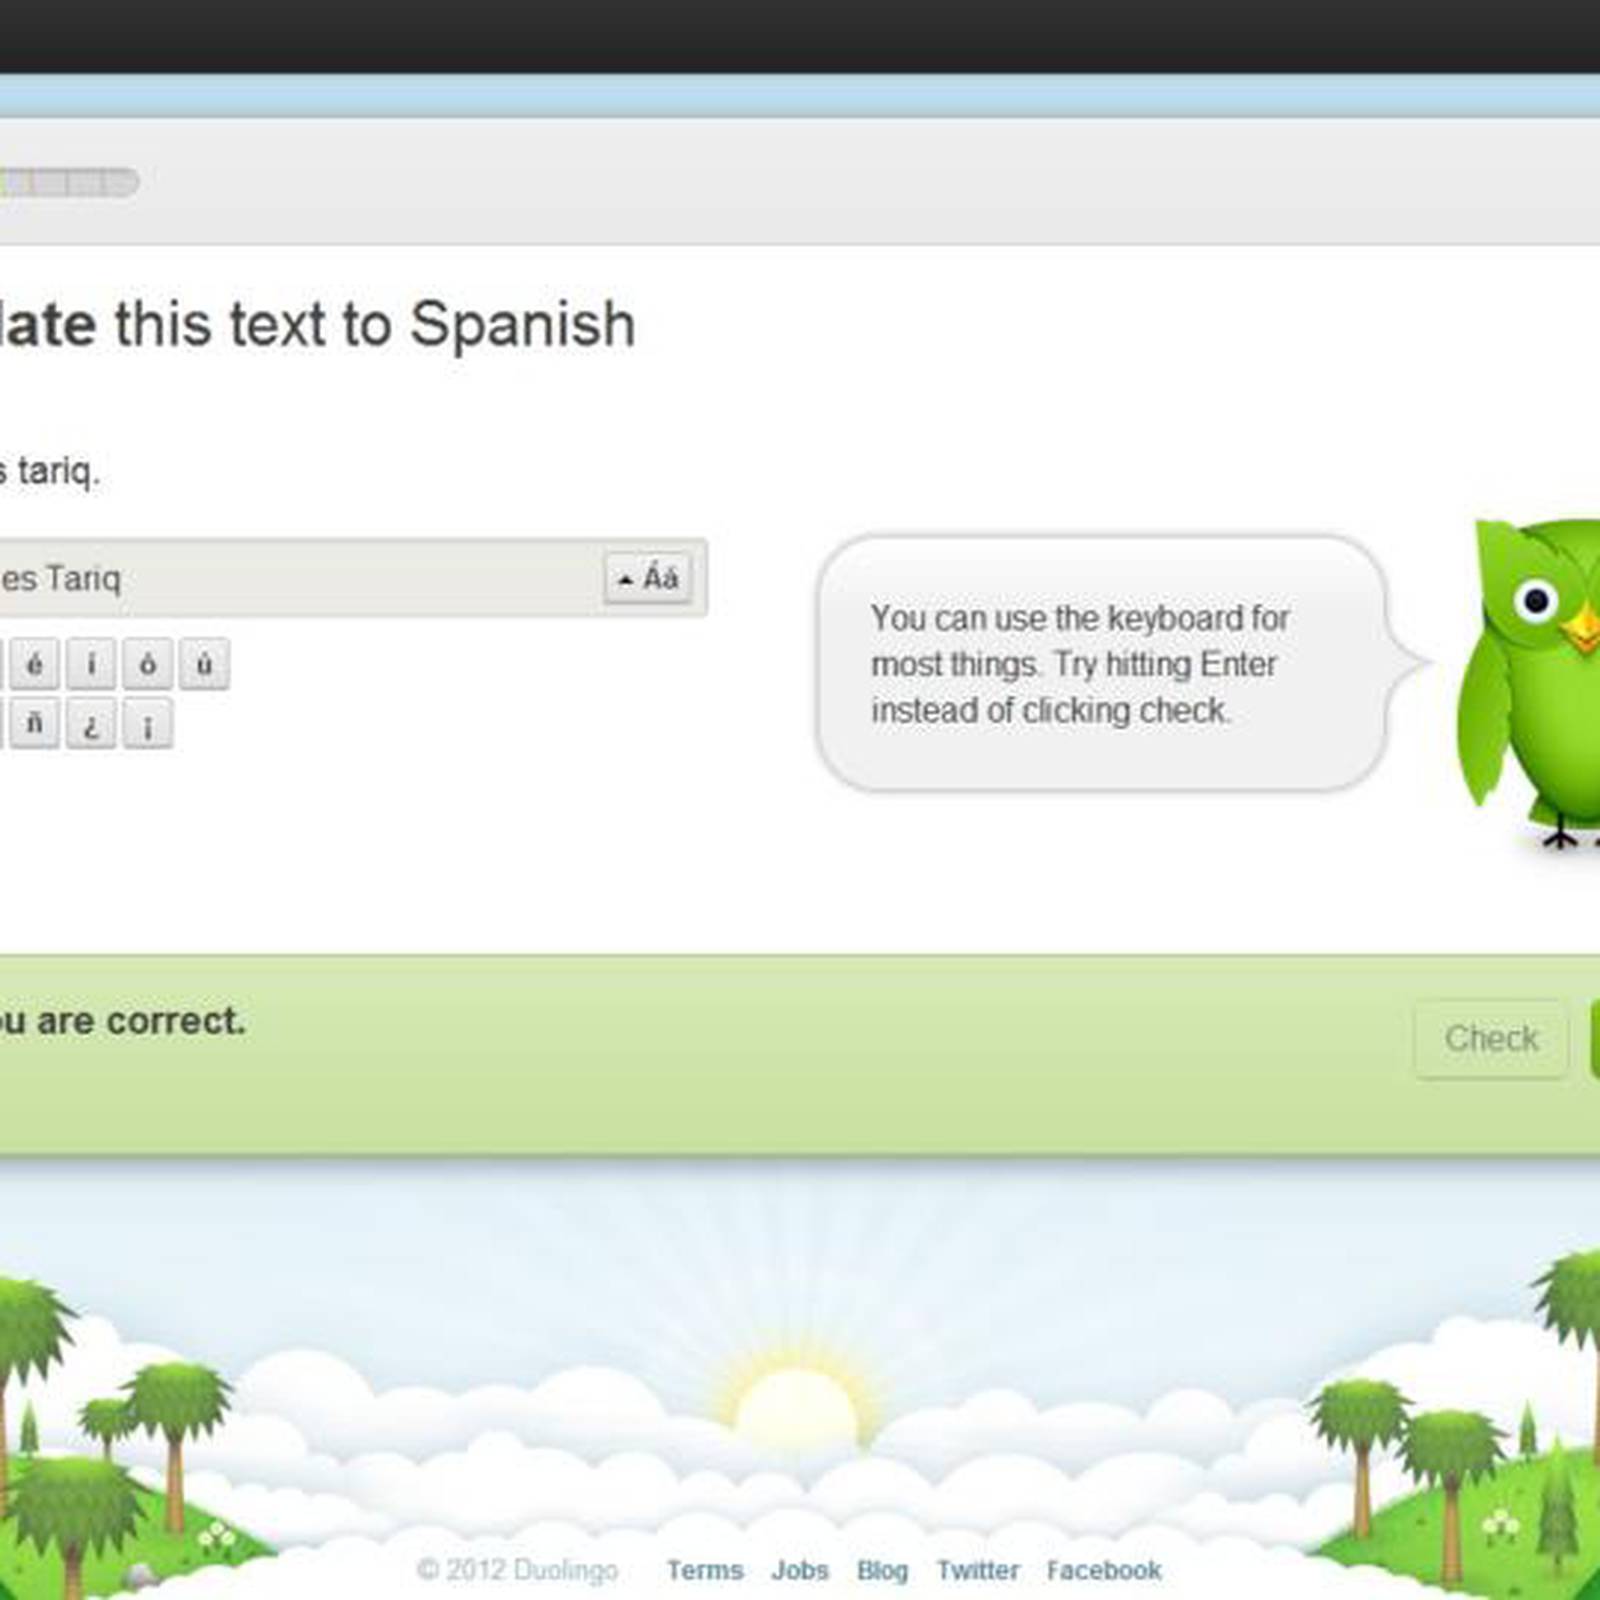 The story of DUOLINGO: The app that is taking the world by storm 🦉 